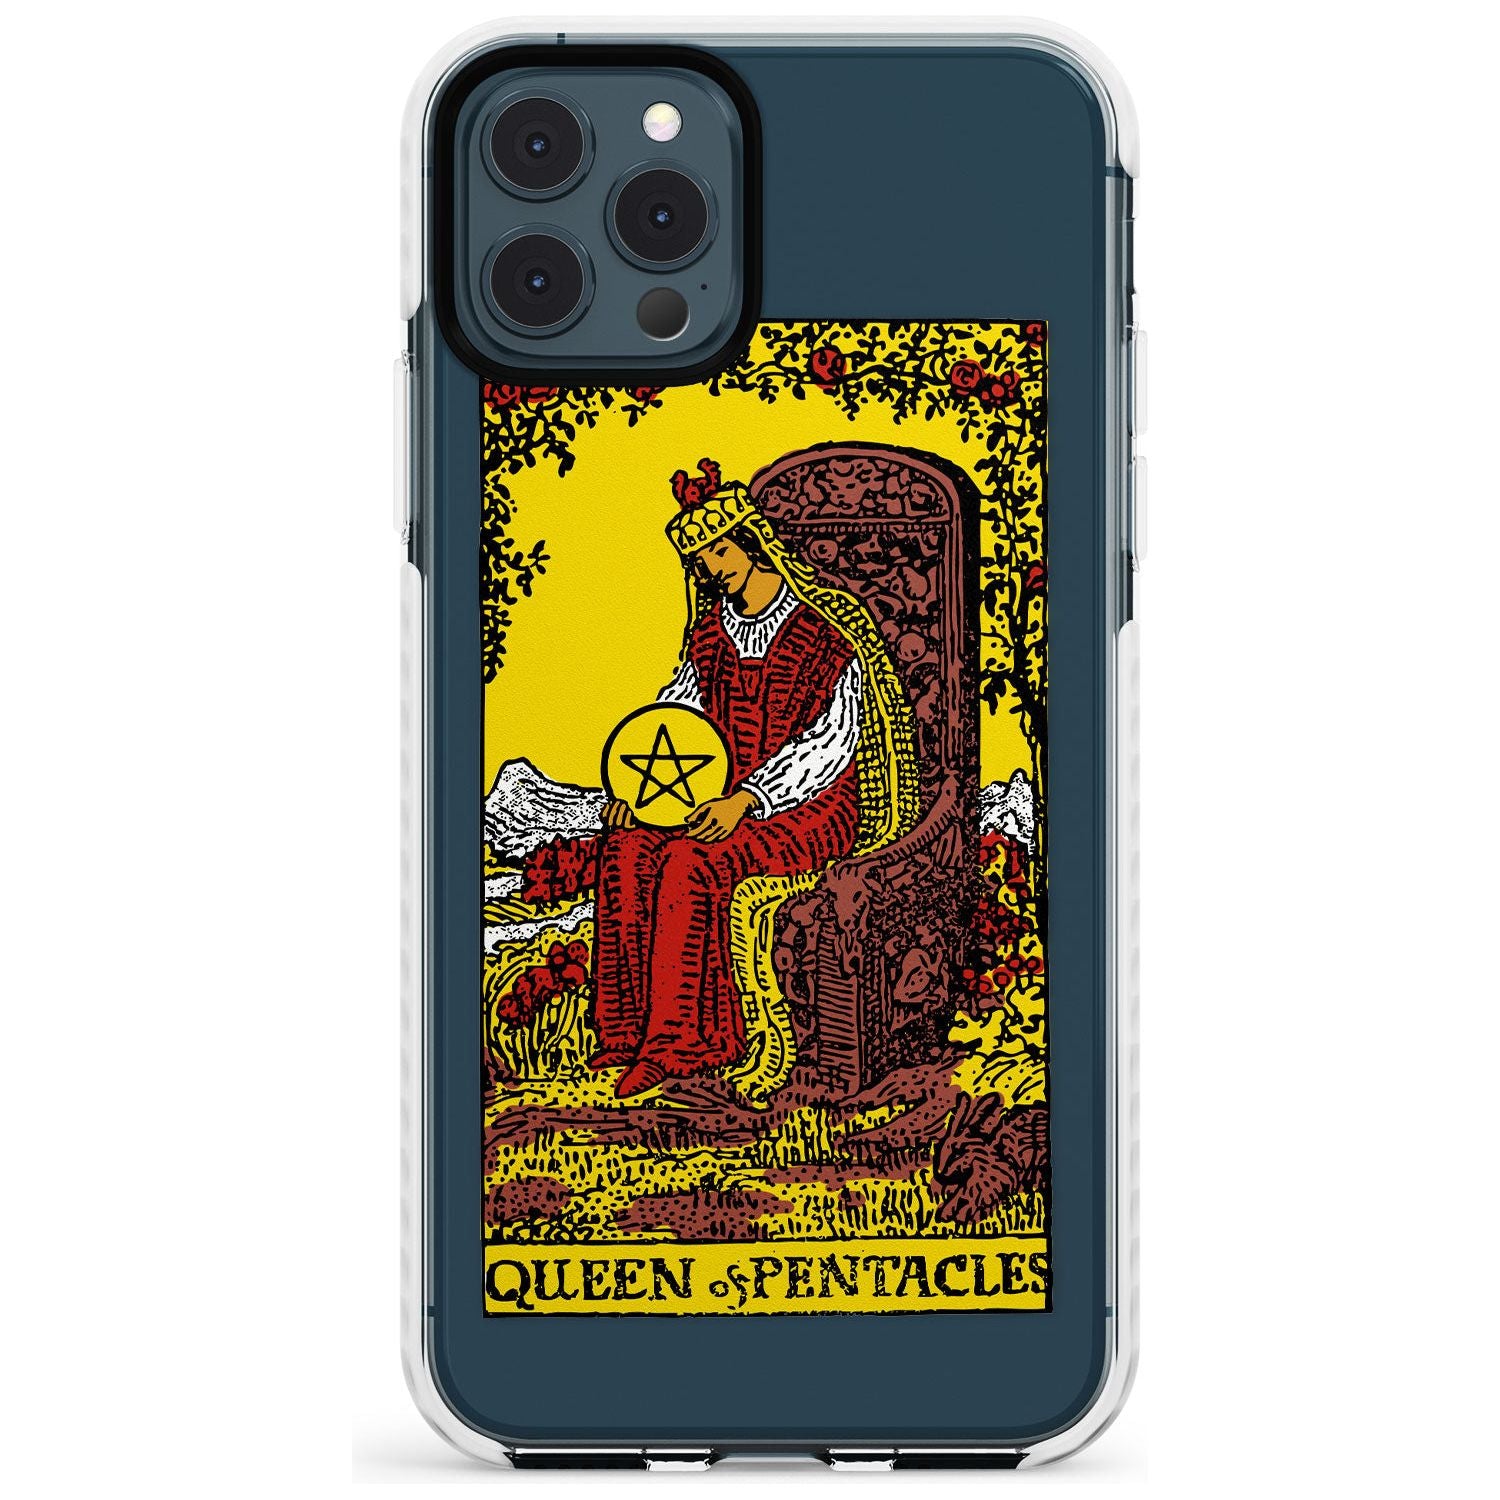 Queen of Pentacles Tarot Card - Colour Slim TPU Phone Case for iPhone 11 Pro Max